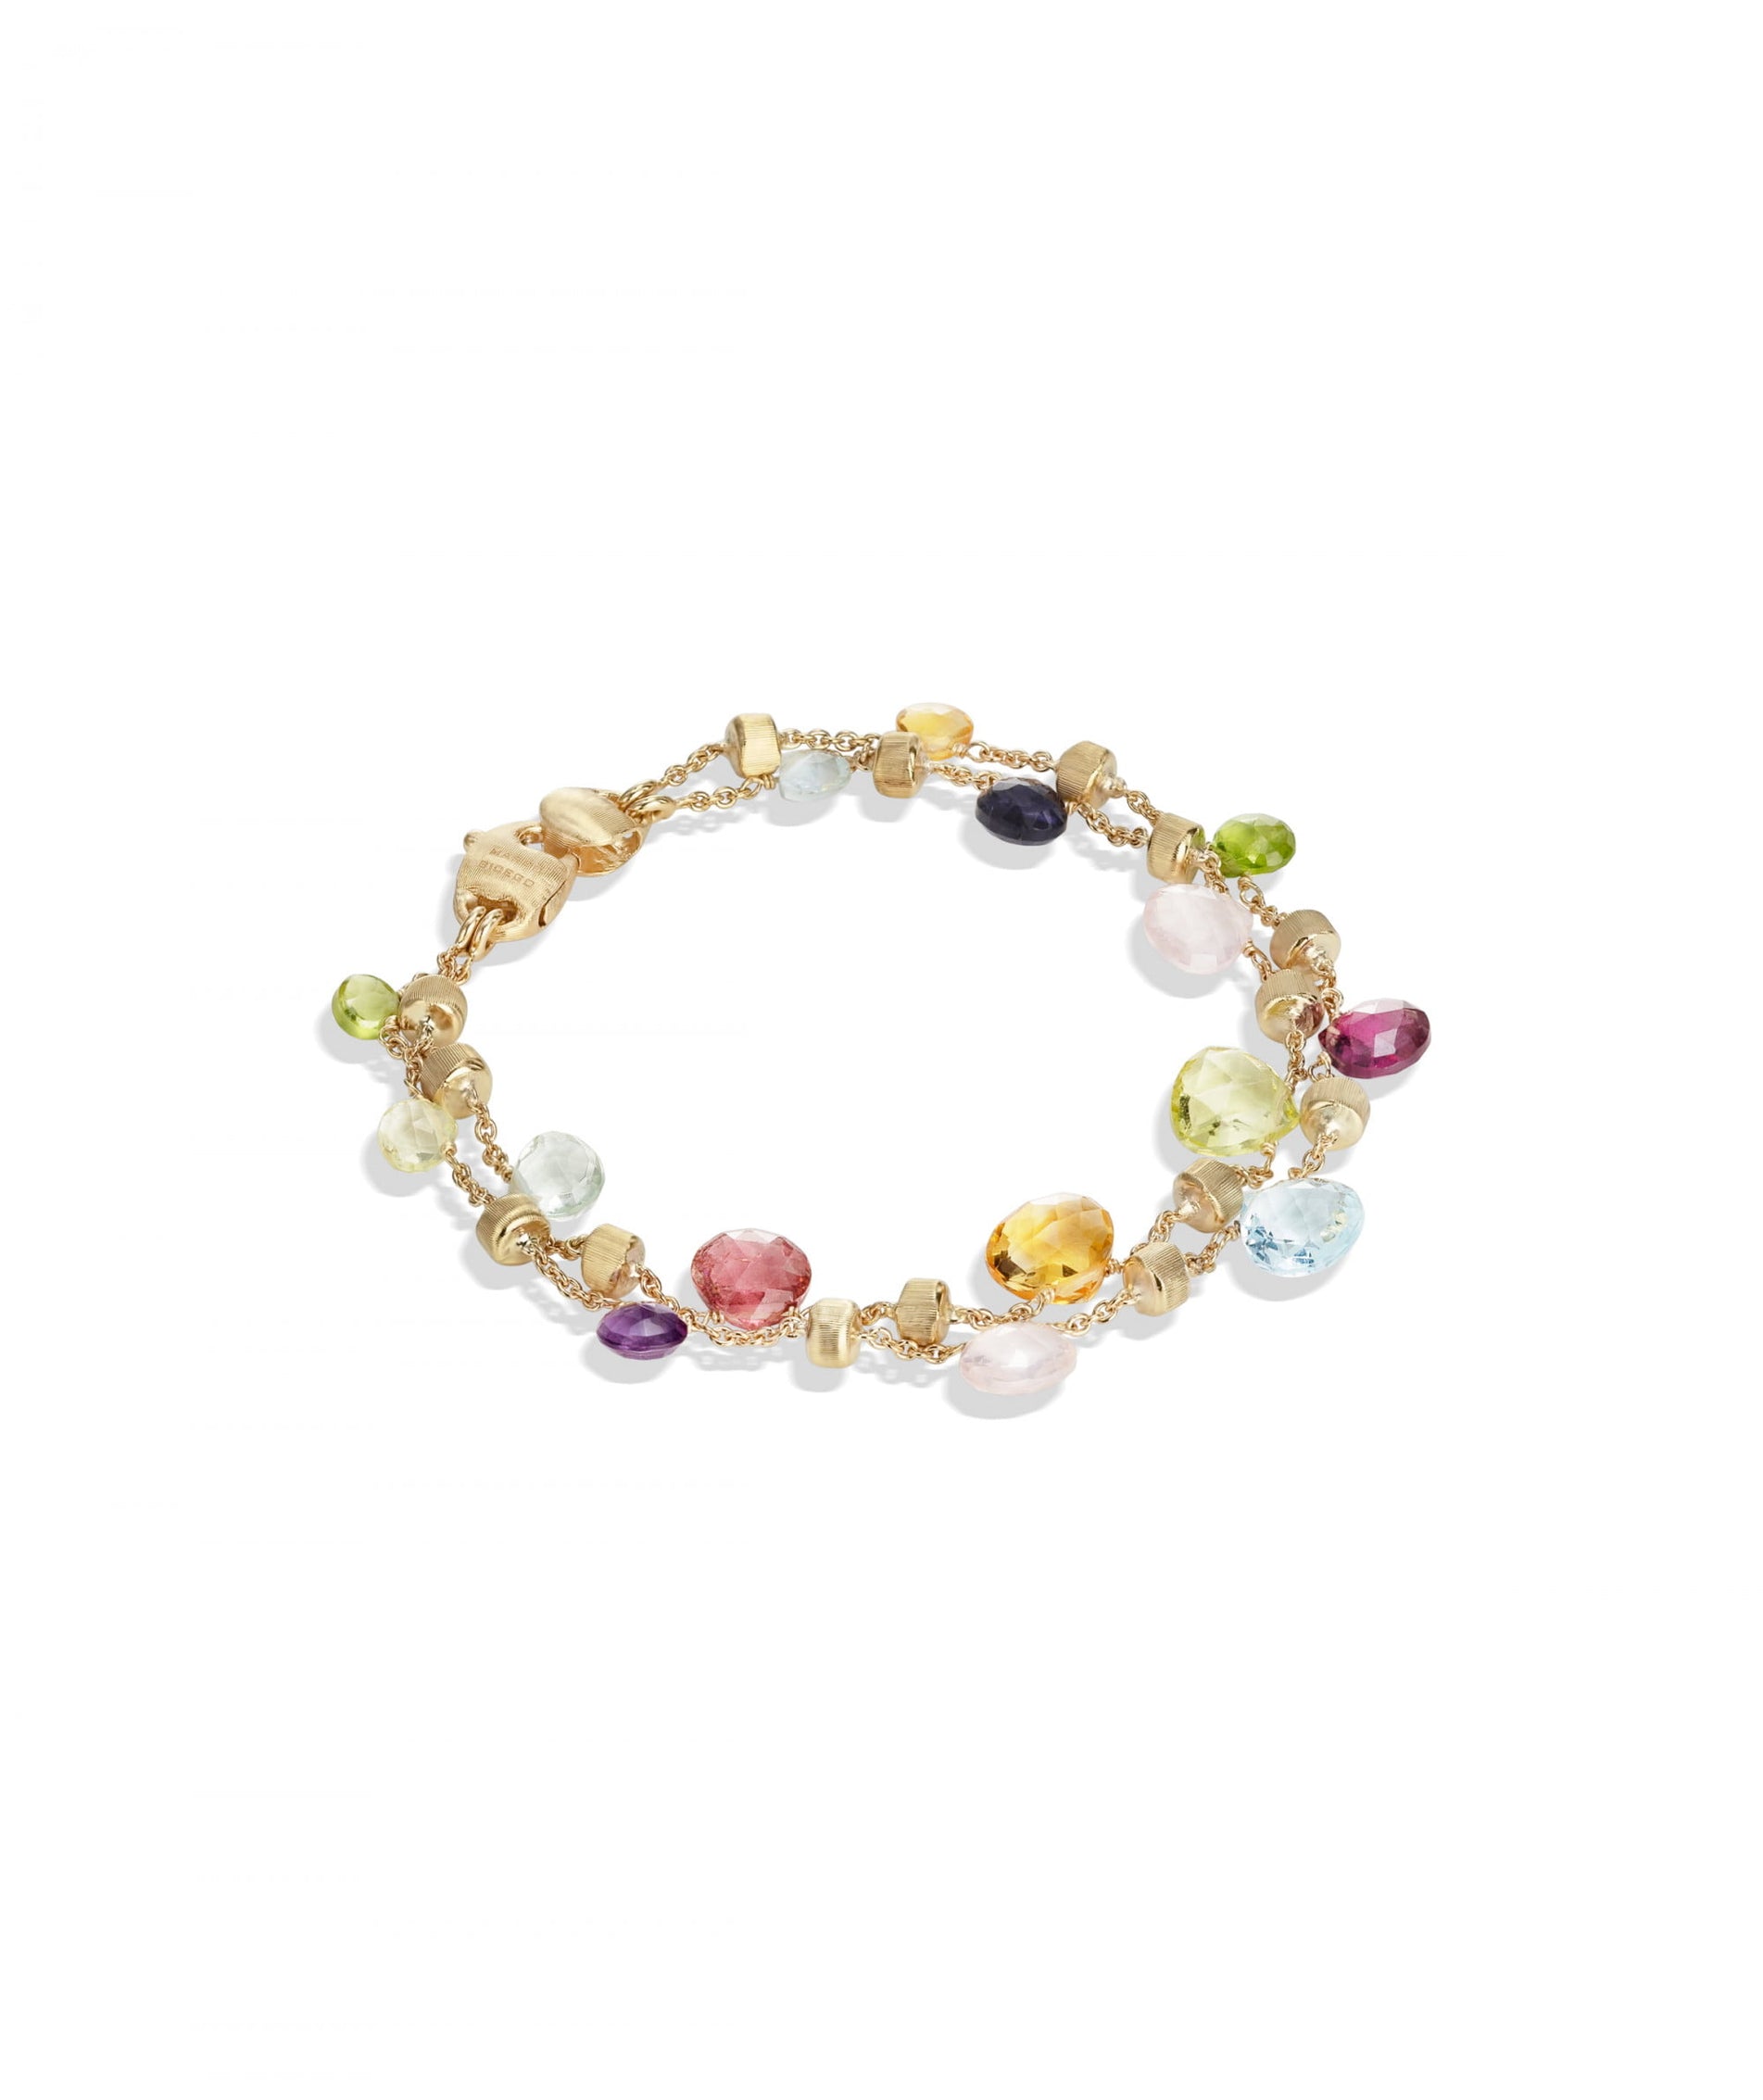 Paradise Bracelet in 18k Yellow Gold with Gemstones Two Strand - Orsini Jewellers NZ